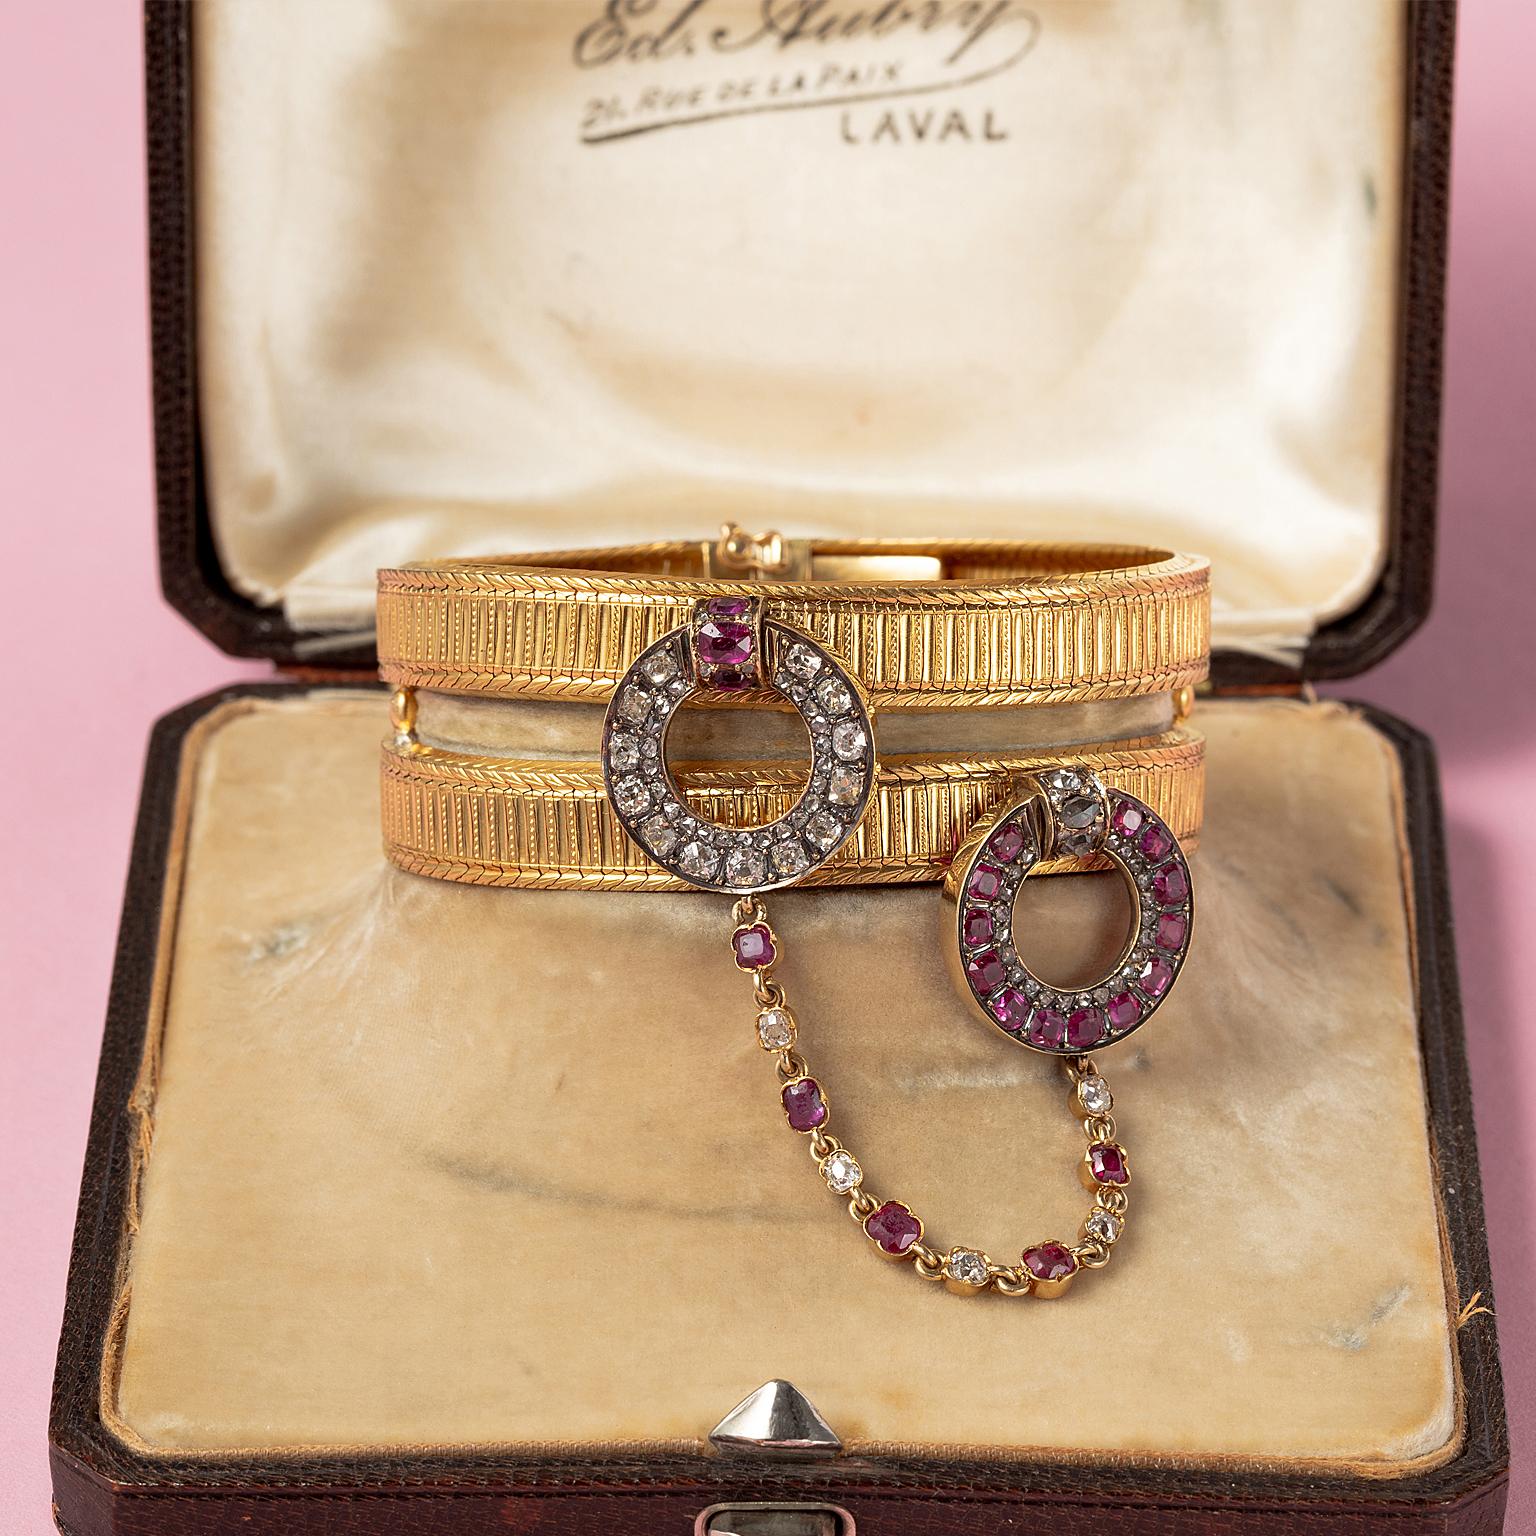 Victorian A Rare 18 Carat Gold French Double Bracelet with Rubies and Diamonds